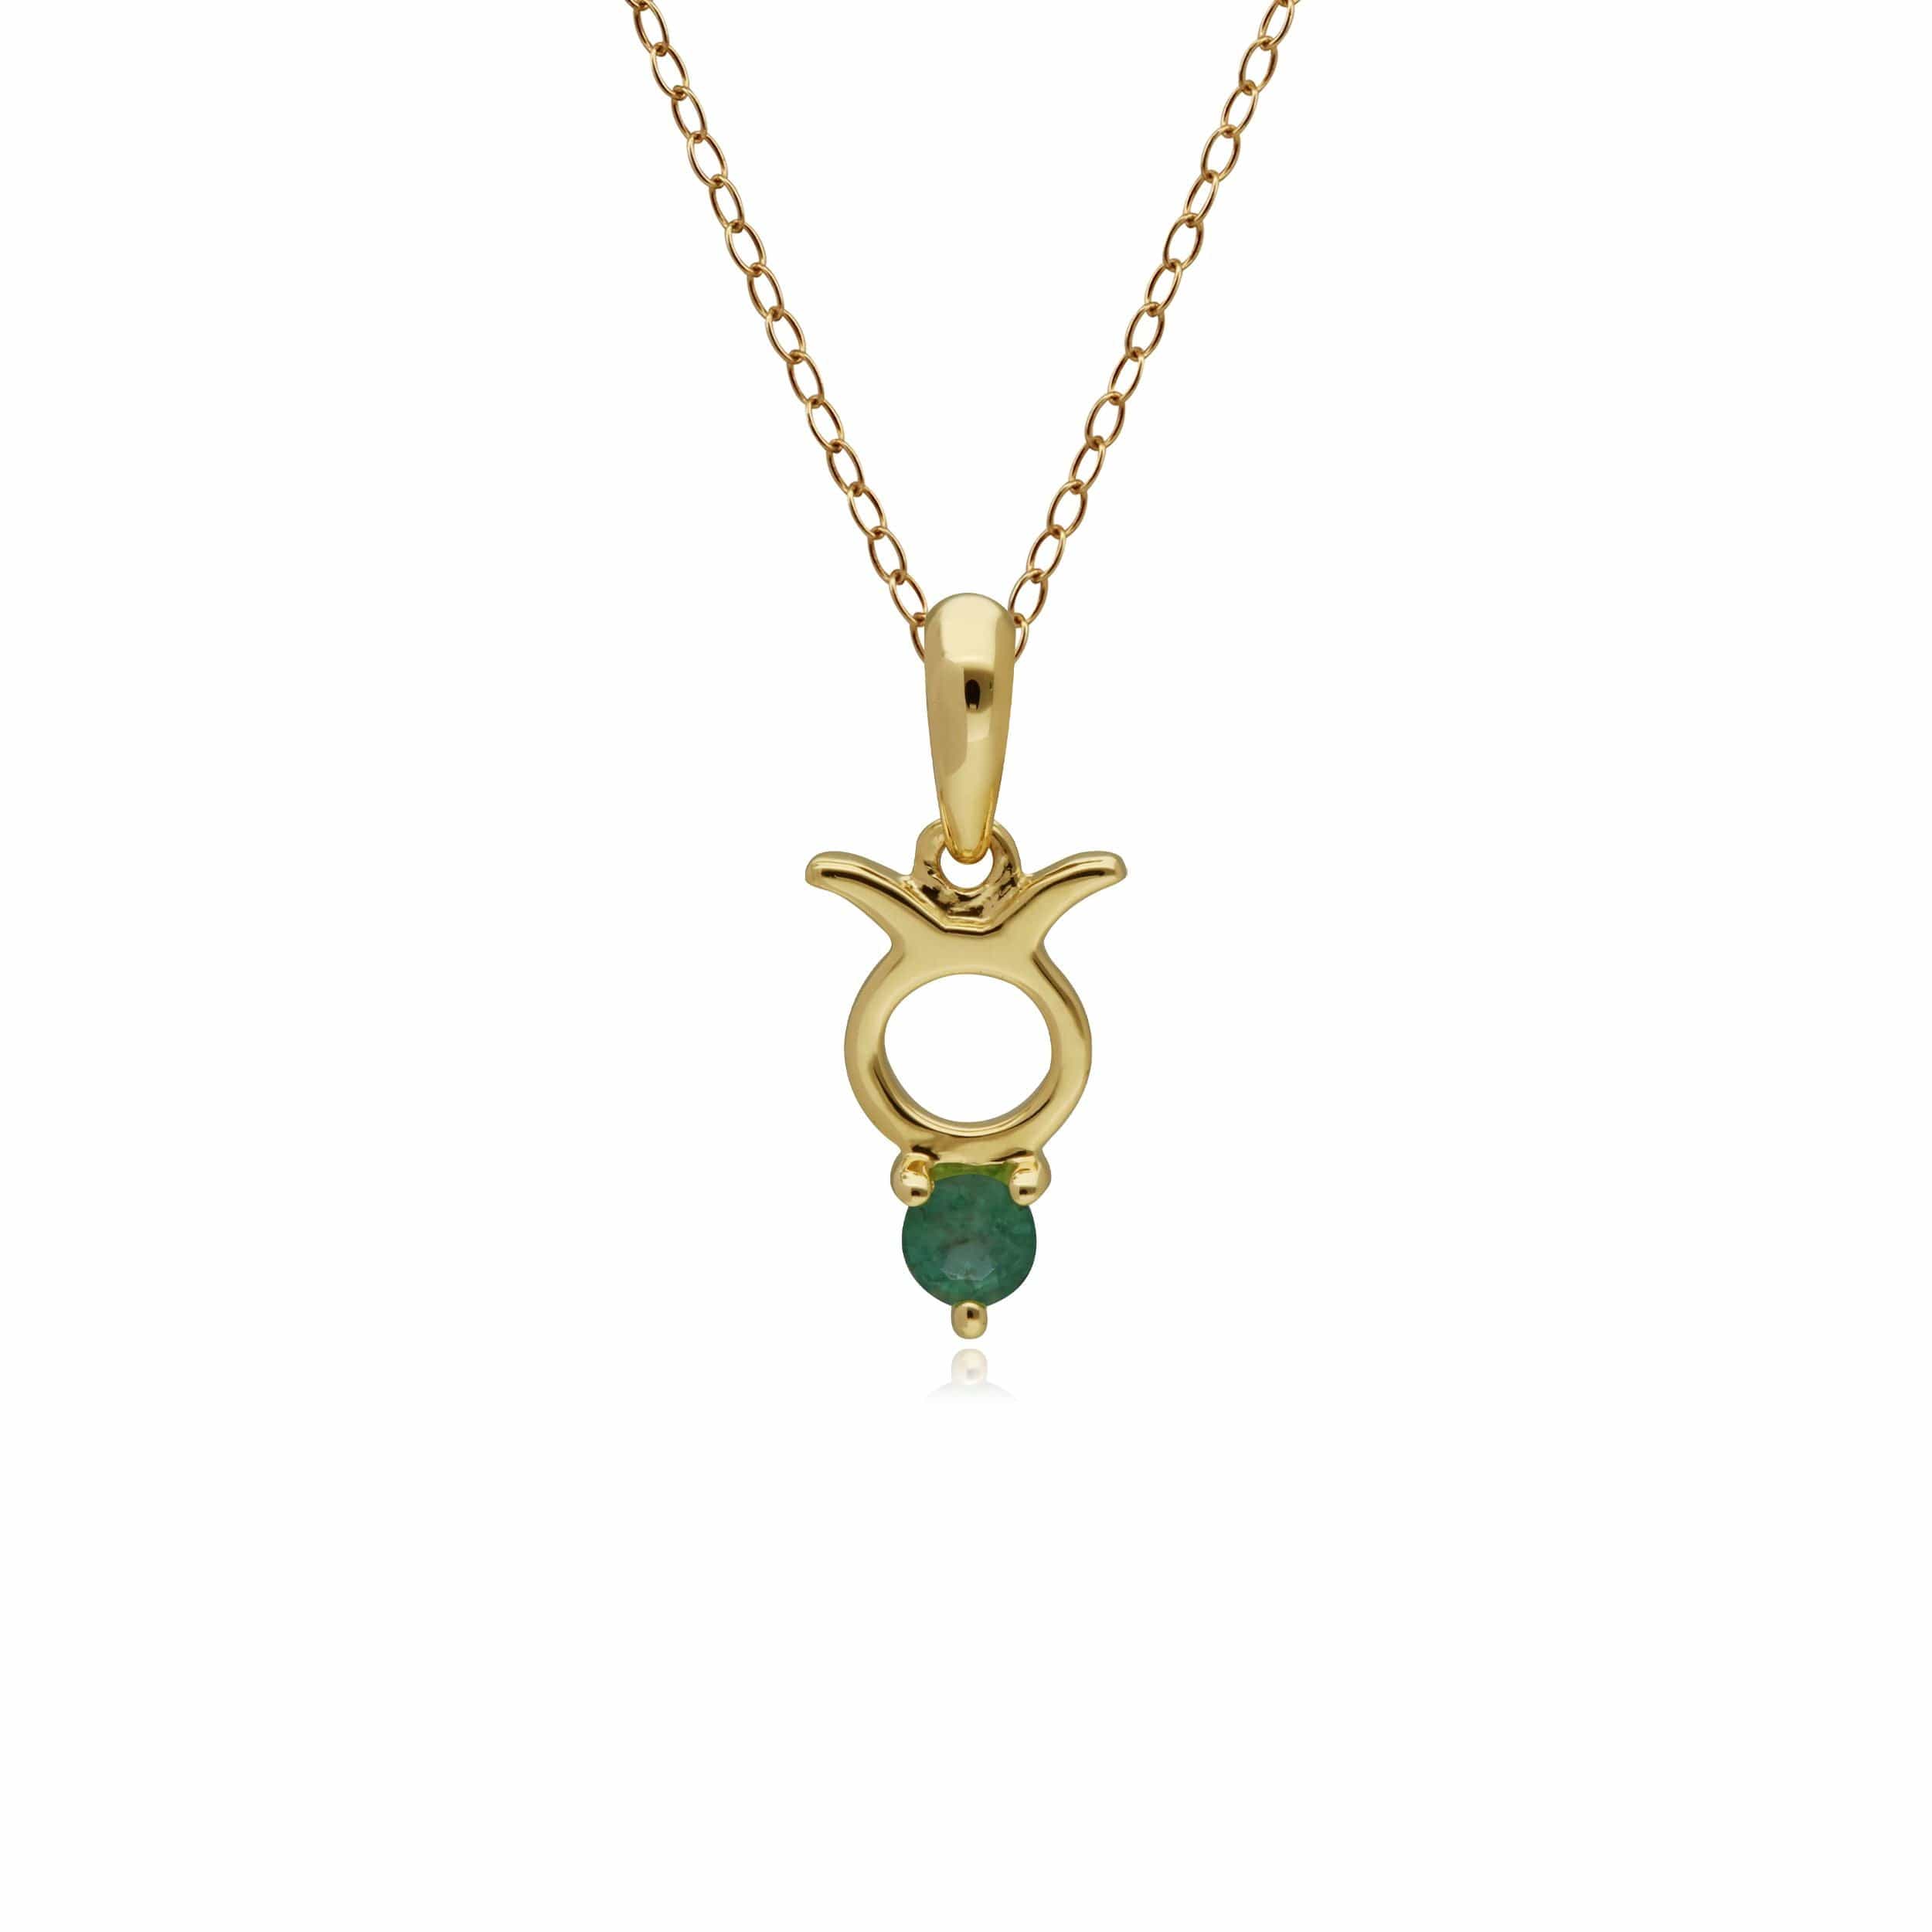 135P1996019 Emerald Taurus Zodiac Charm Necklace in 9ct Yellow Gold 1